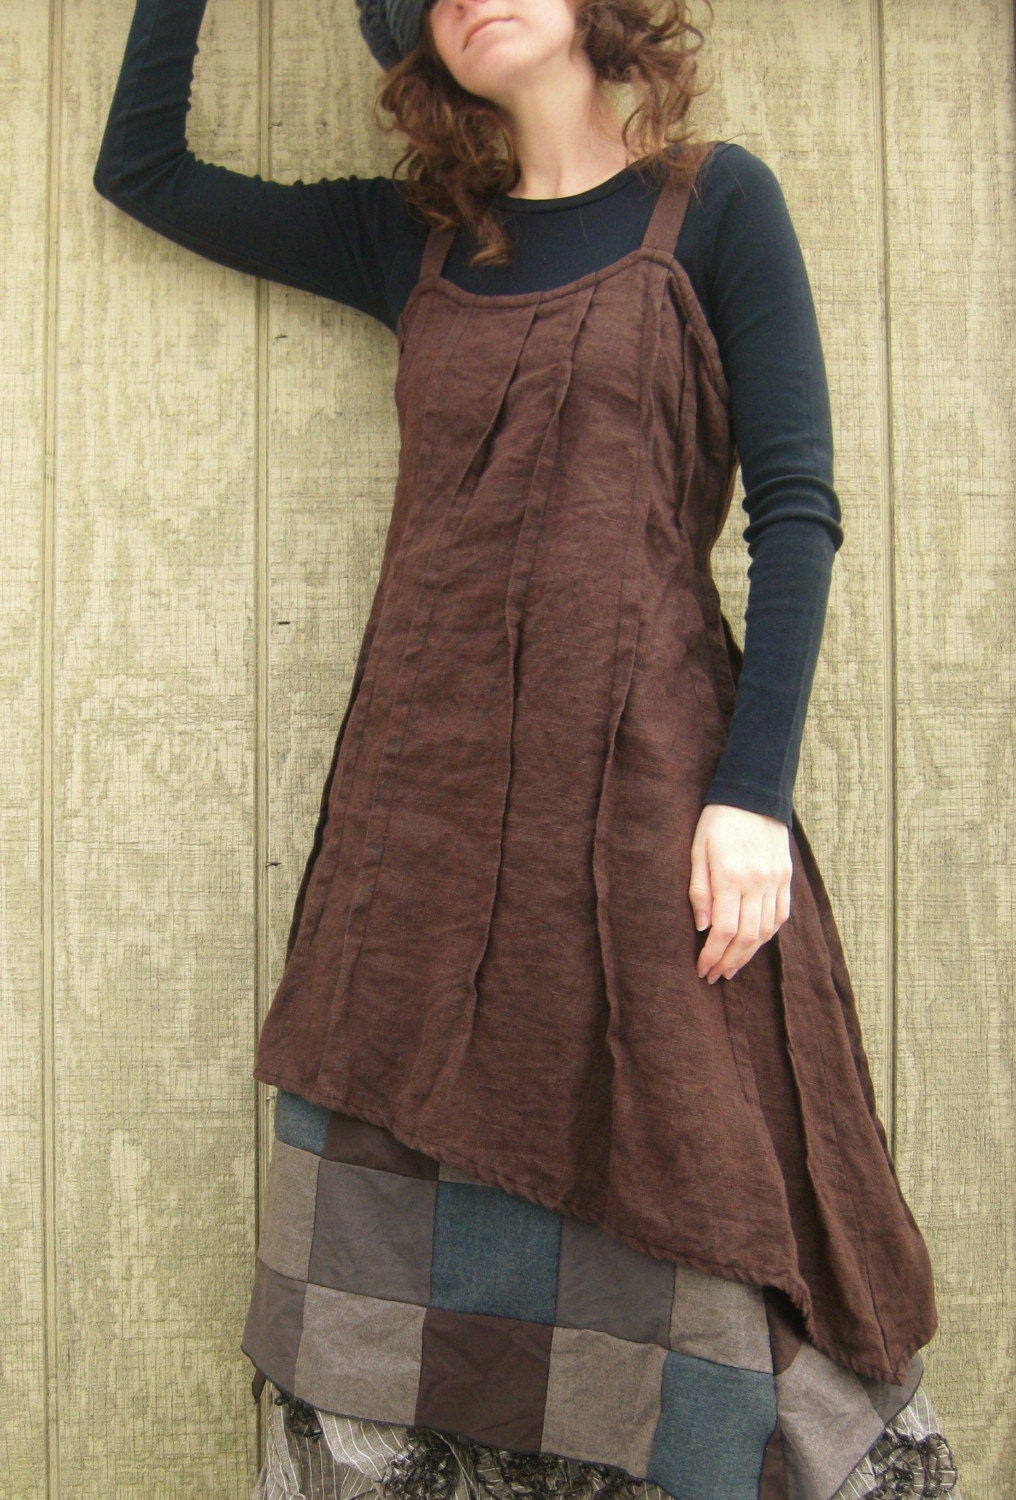 Brown Linen Slant Dress reserved for voxxx by sarahclemensclothing